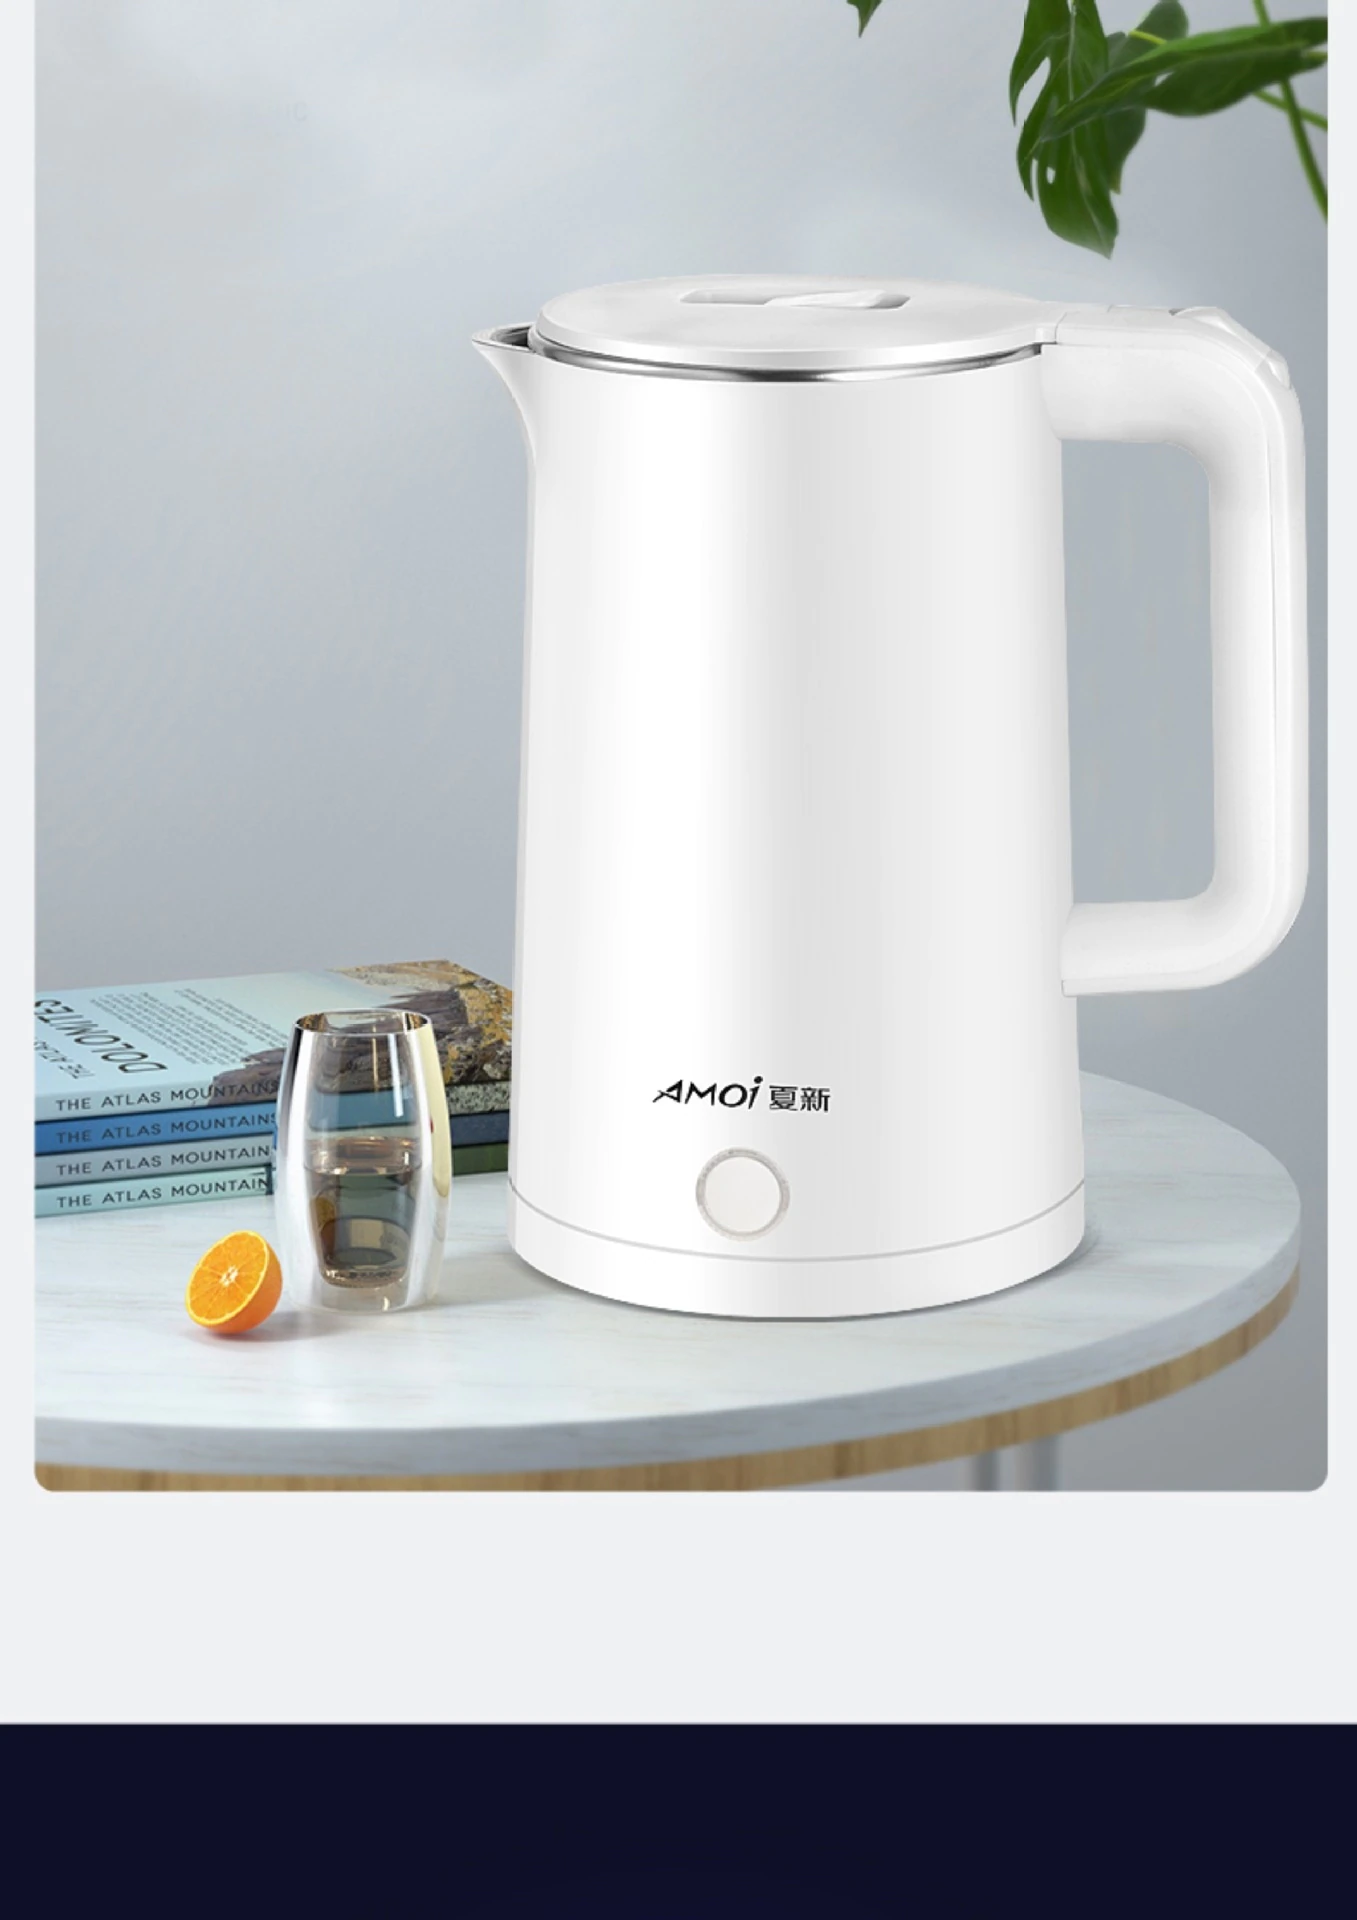 Amoi intelligent thermal insulation electric kettle with double iron stainless steel kettle automatically power